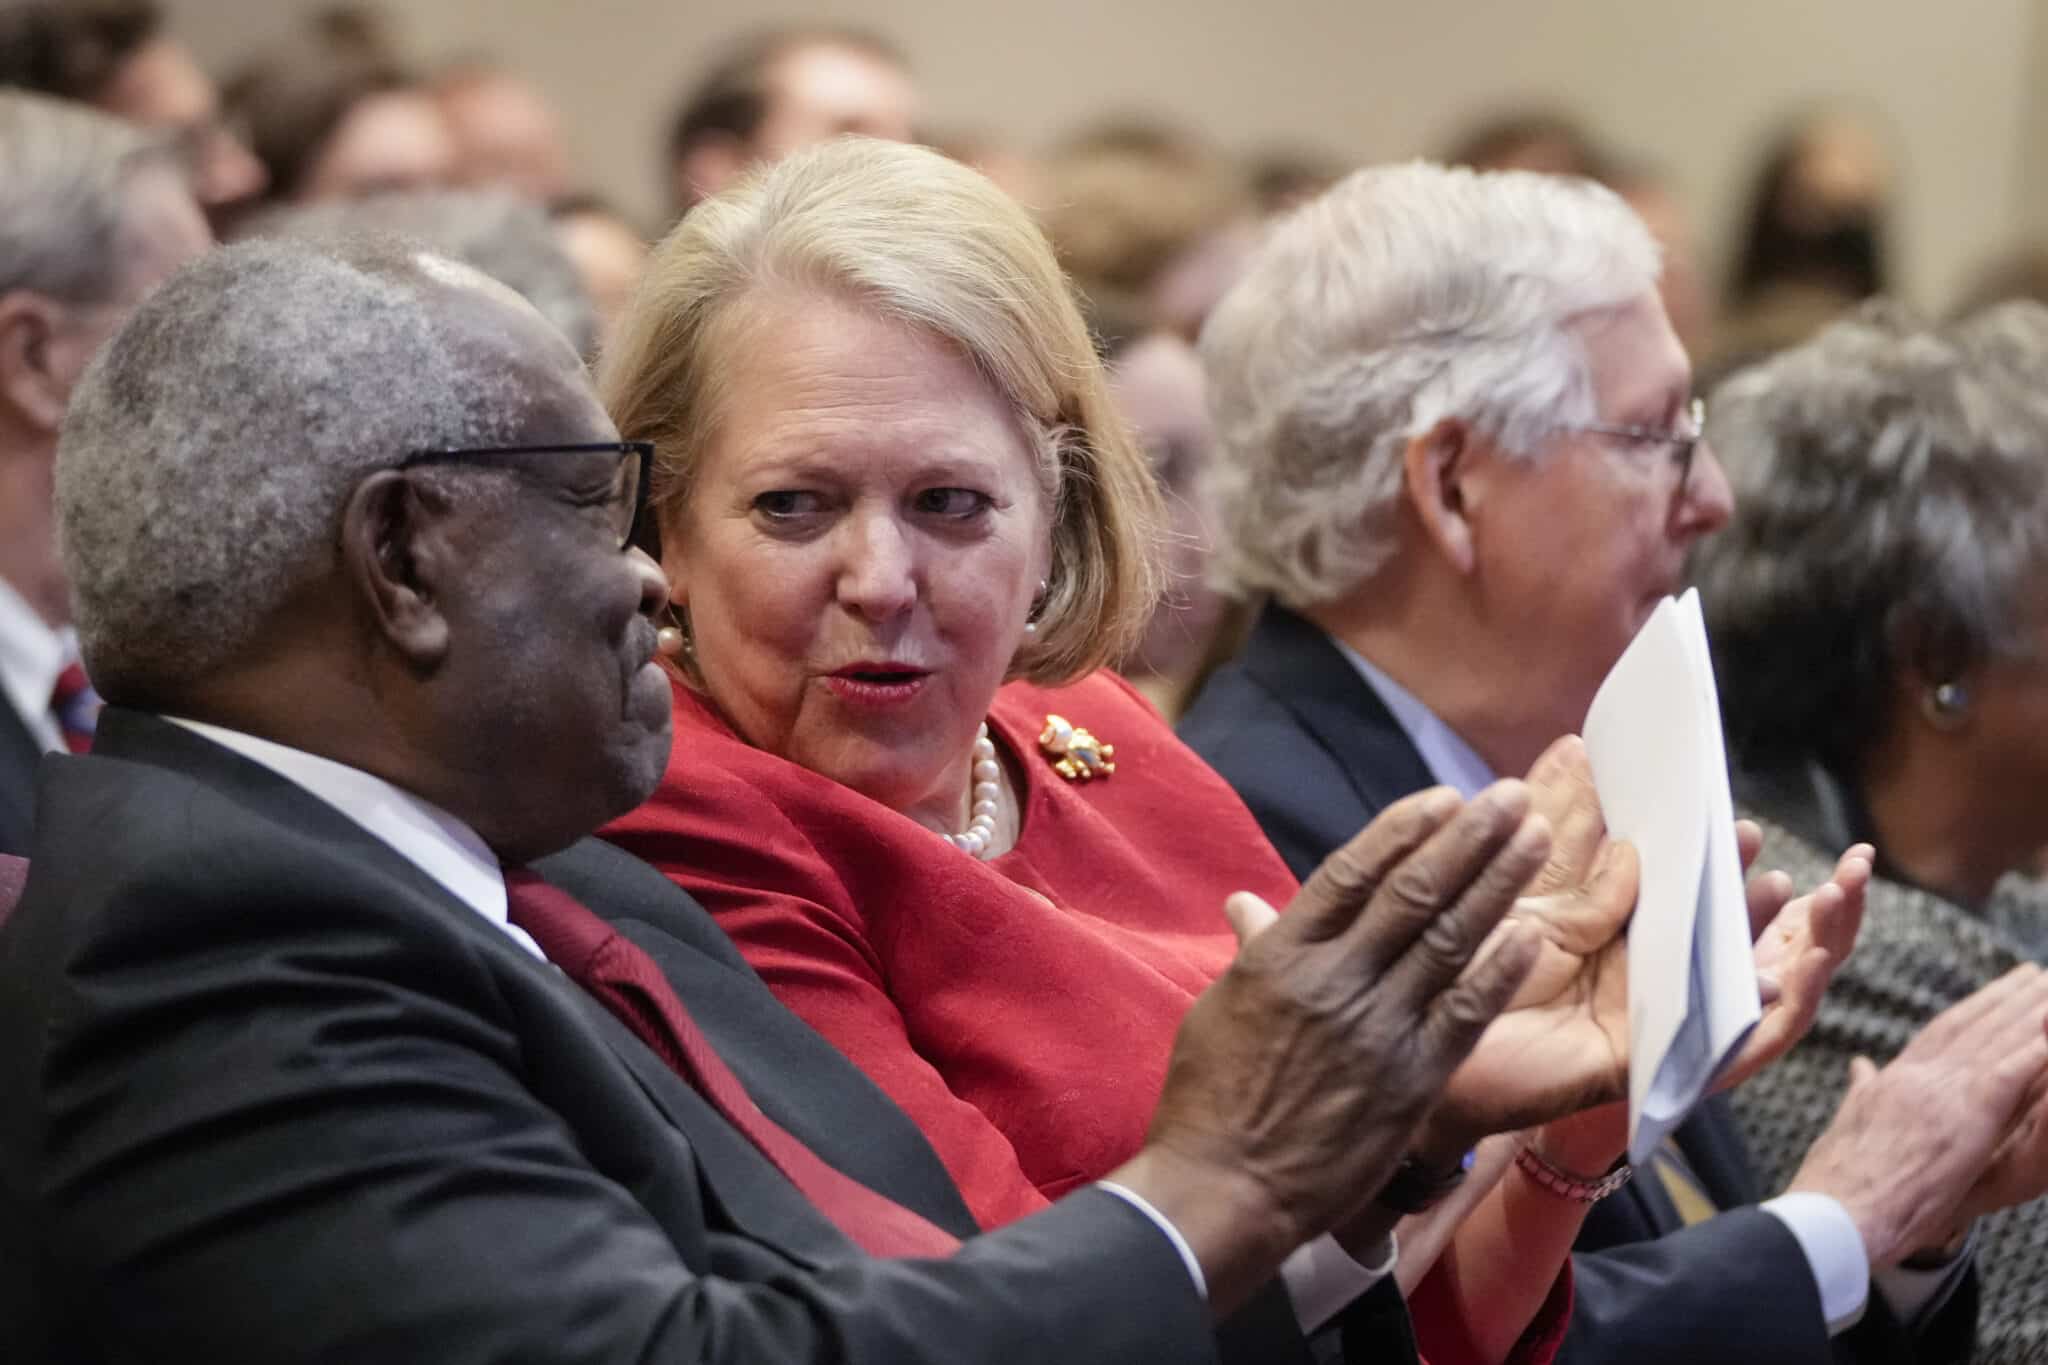 (L-R) Associate Supreme Court Justice Clarence Thomas sits with his wife and conservative activist Virginia Thomas while he waits to speak at the Heritage Foundation on October 21, 2021 in Washington, DC.